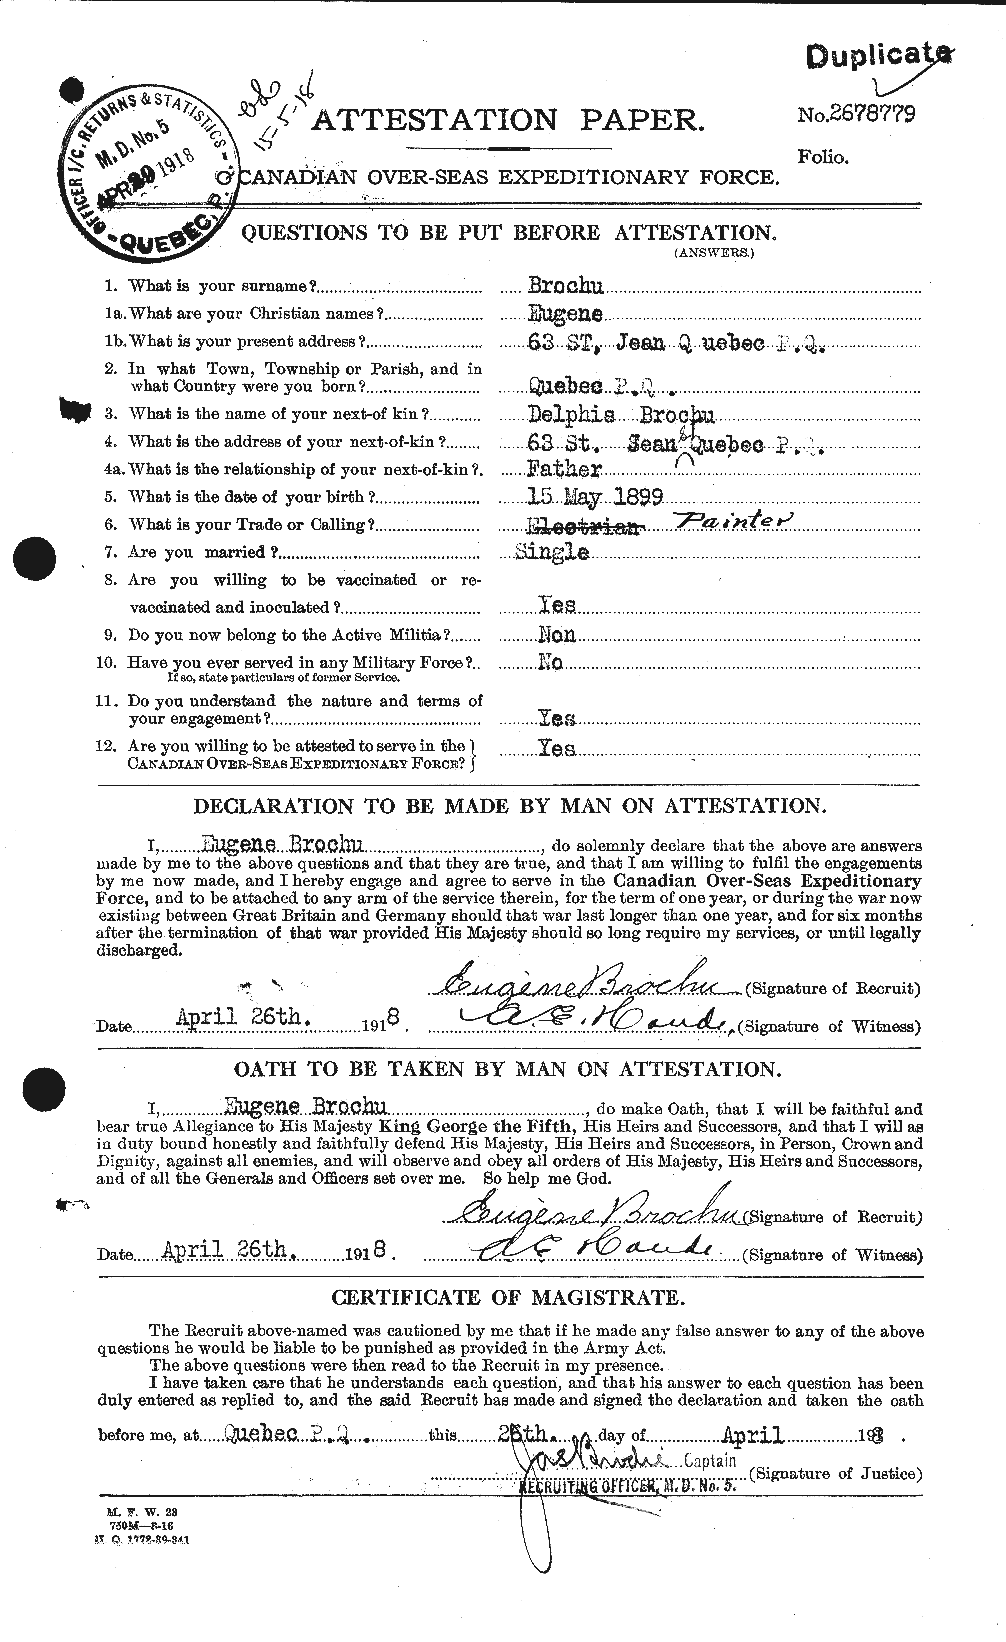 Personnel Records of the First World War - CEF 263864a